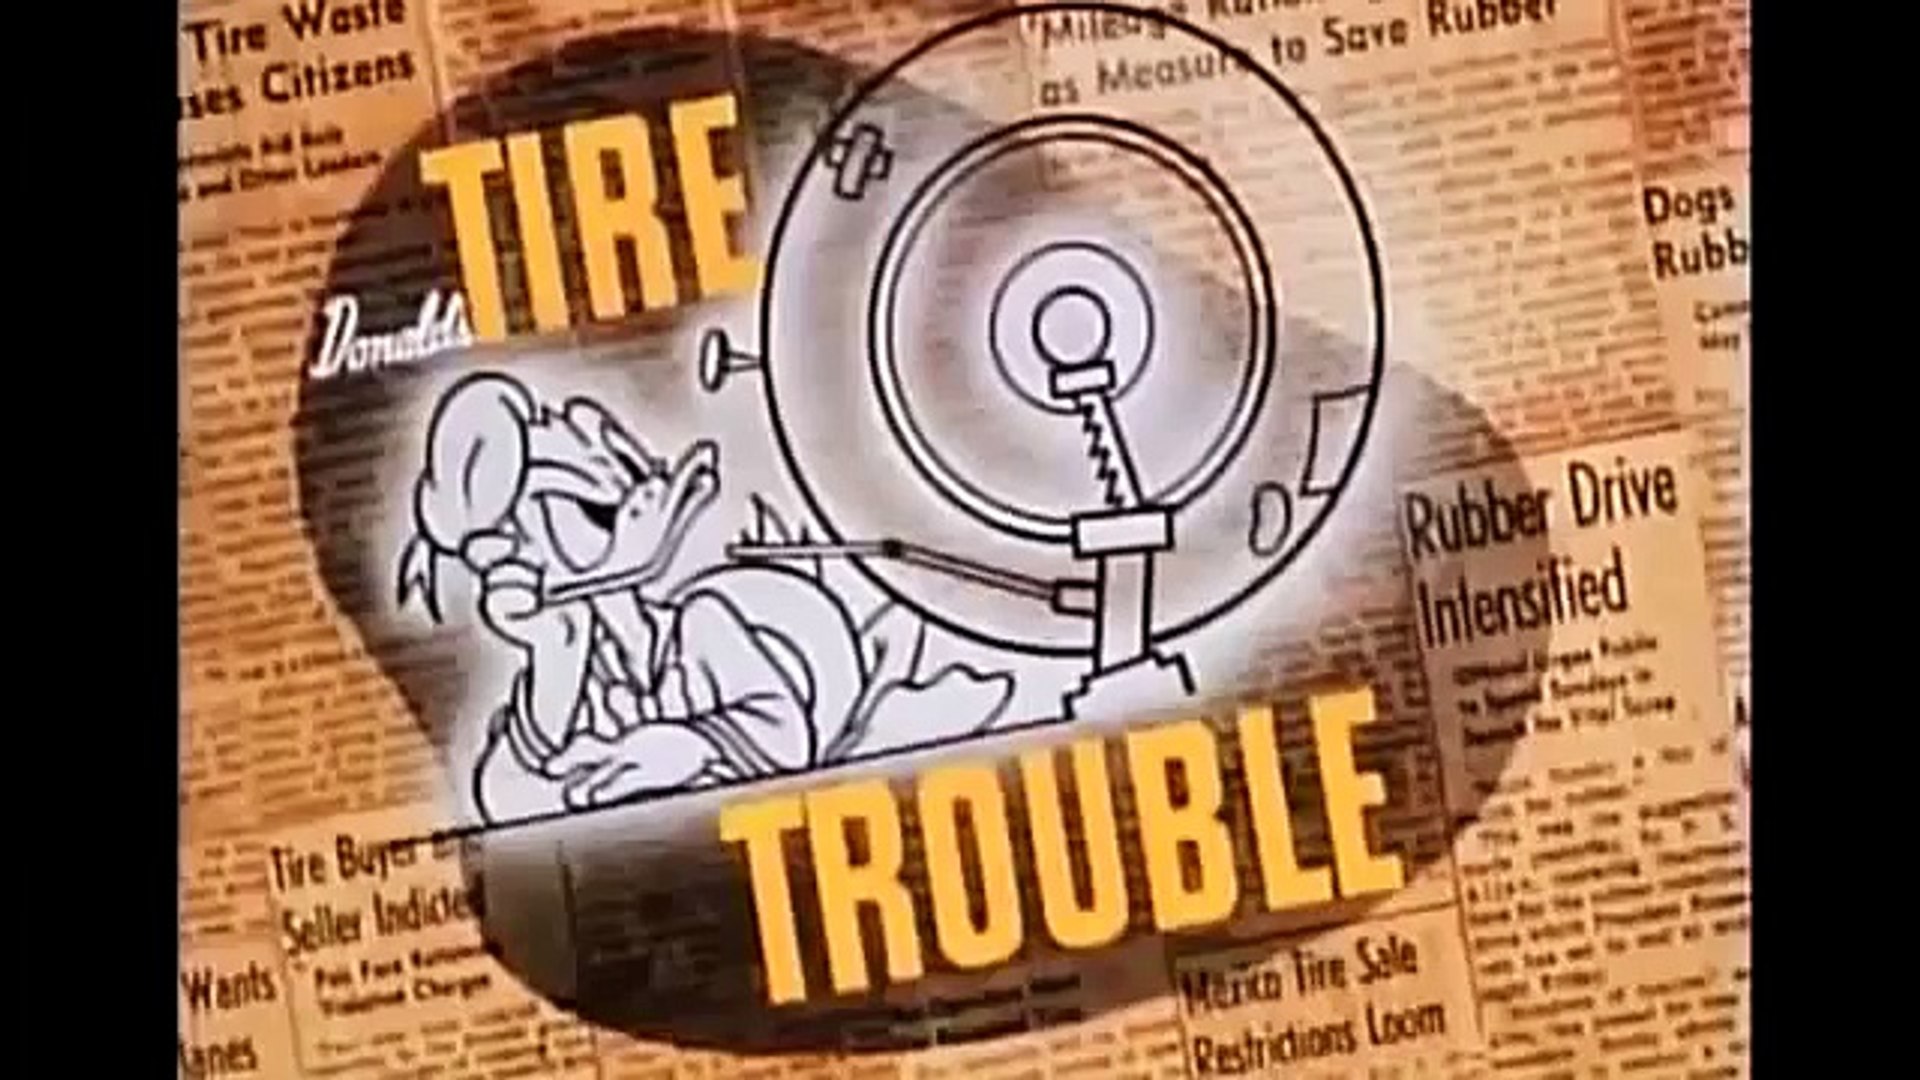 Donal Duck , Chip and Dale , Mickey Mouse and Pluto Cartoons ! TIRE TROUBLE